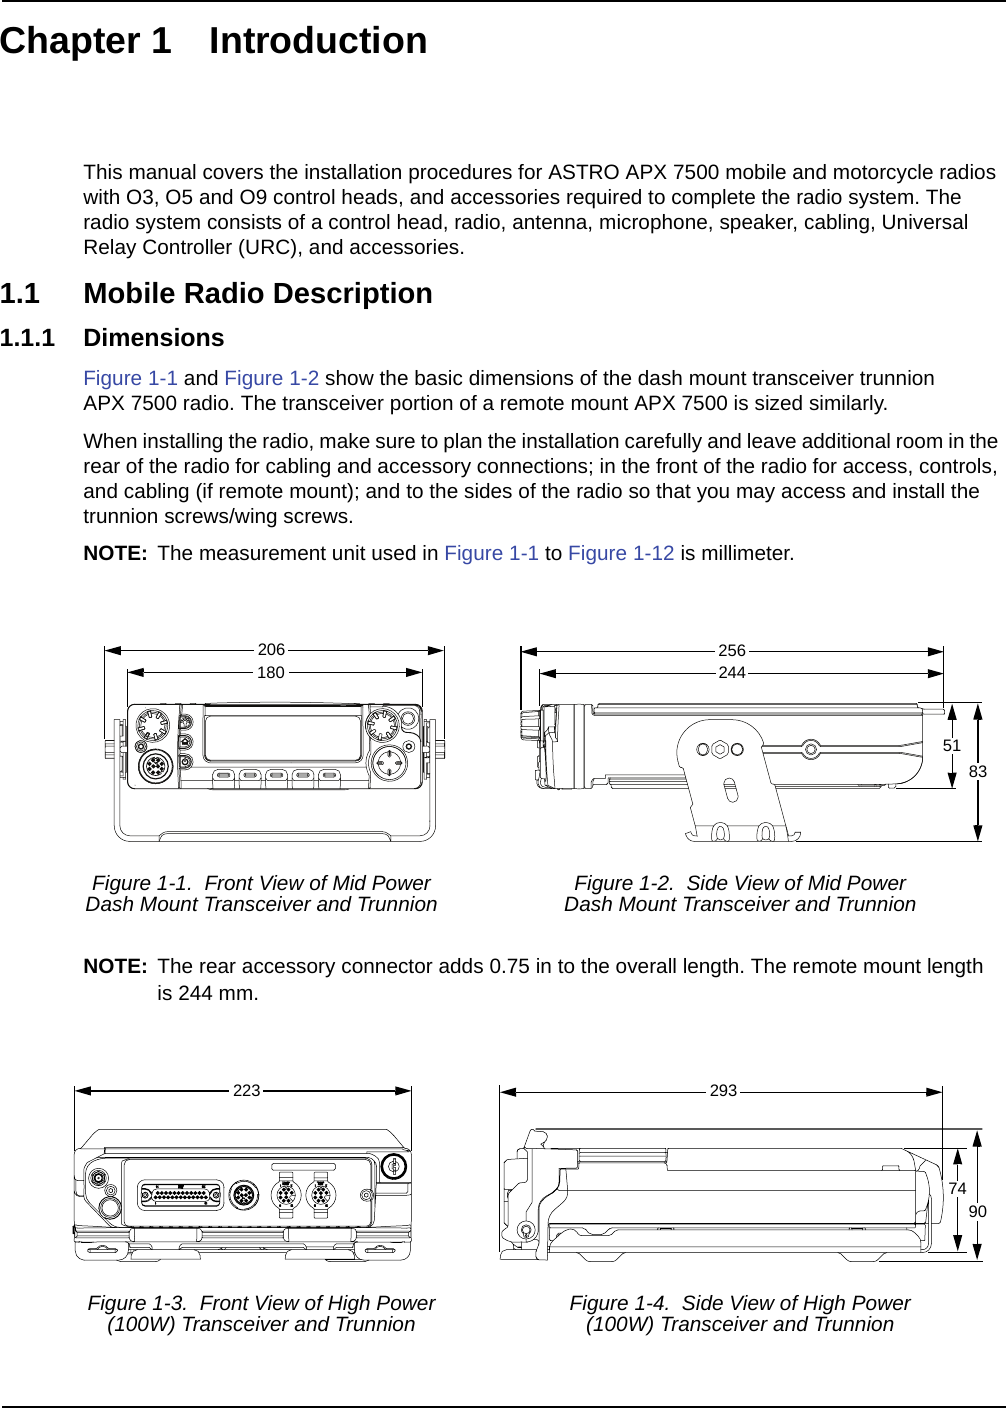 Chapter 1 IntroductionThis manual covers the installation procedures for ASTRO APX 7500 mobile and motorcycle radios with O3, O5 and O9 control heads, and accessories required to complete the radio system. The radio system consists of a control head, radio, antenna, microphone, speaker, cabling, Universal Relay Controller (URC), and accessories.1.1 Mobile Radio Description1.1.1 DimensionsFigure 1-1 and Figure 1-2 show the basic dimensions of the dash mount transceiver trunnion APX 7500 radio. The transceiver portion of a remote mount APX 7500 is sized similarly. When installing the radio, make sure to plan the installation carefully and leave additional room in the rear of the radio for cabling and accessory connections; in the front of the radio for access, controls, and cabling (if remote mount); and to the sides of the radio so that you may access and install the trunnion screws/wing screws.NOTE: The measurement unit used in Figure 1-1 to Figure 1-12 is millimeter.NOTE: The rear accessory connector adds 0.75 in to the overall length. The remote mount length is 244 mm.Figure 1-1.  Front View of Mid PowerDash Mount Transceiver and Trunnion Figure 1-2.  Side View of Mid PowerDash Mount Transceiver and TrunnionFigure 1-3.  Front View of High Power (100W) Transceiver and Trunnion Figure 1-4.  Side View of High Power(100W) Transceiver and Trunnion20618025624451832237490293